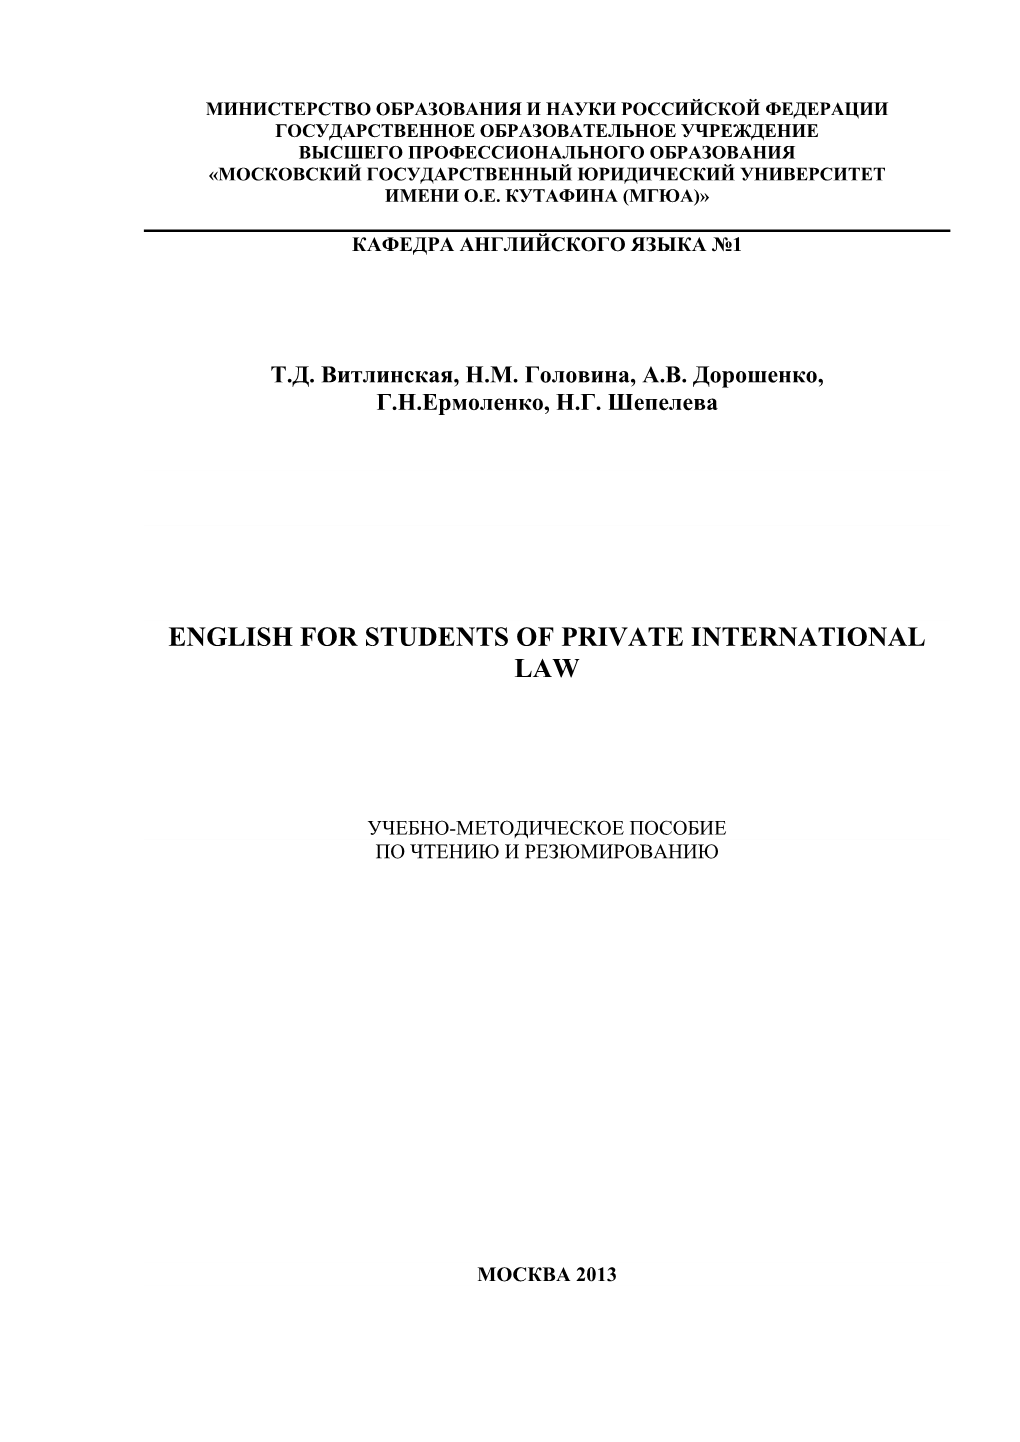 English for Students of Private International Law